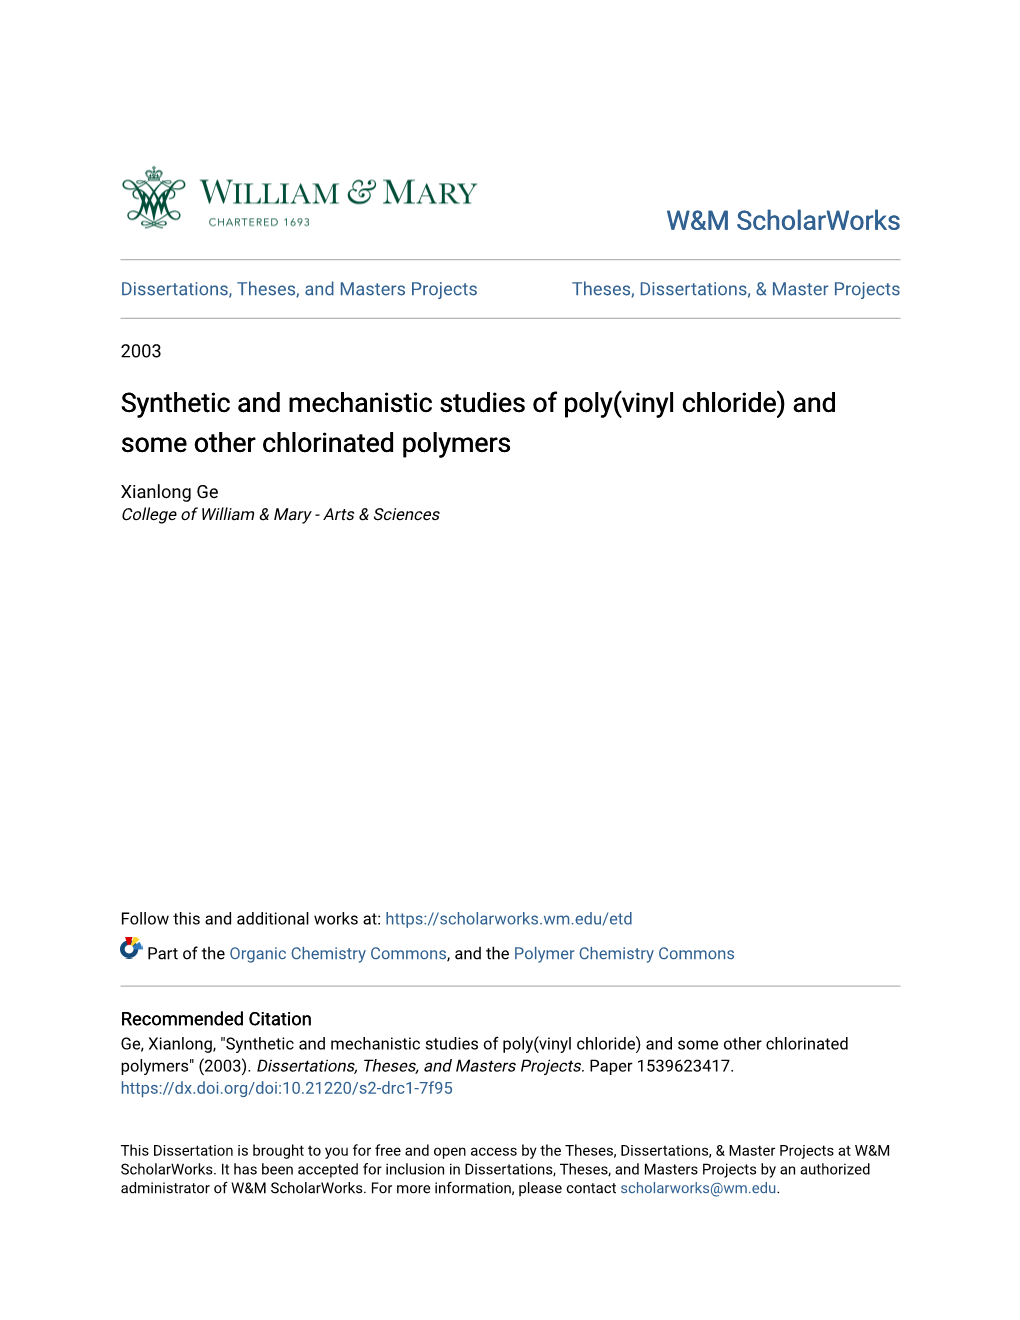 Synthetic and Mechanistic Studies of Poly(Vinyl Chloride) and Some Other Chlorinated Polymers